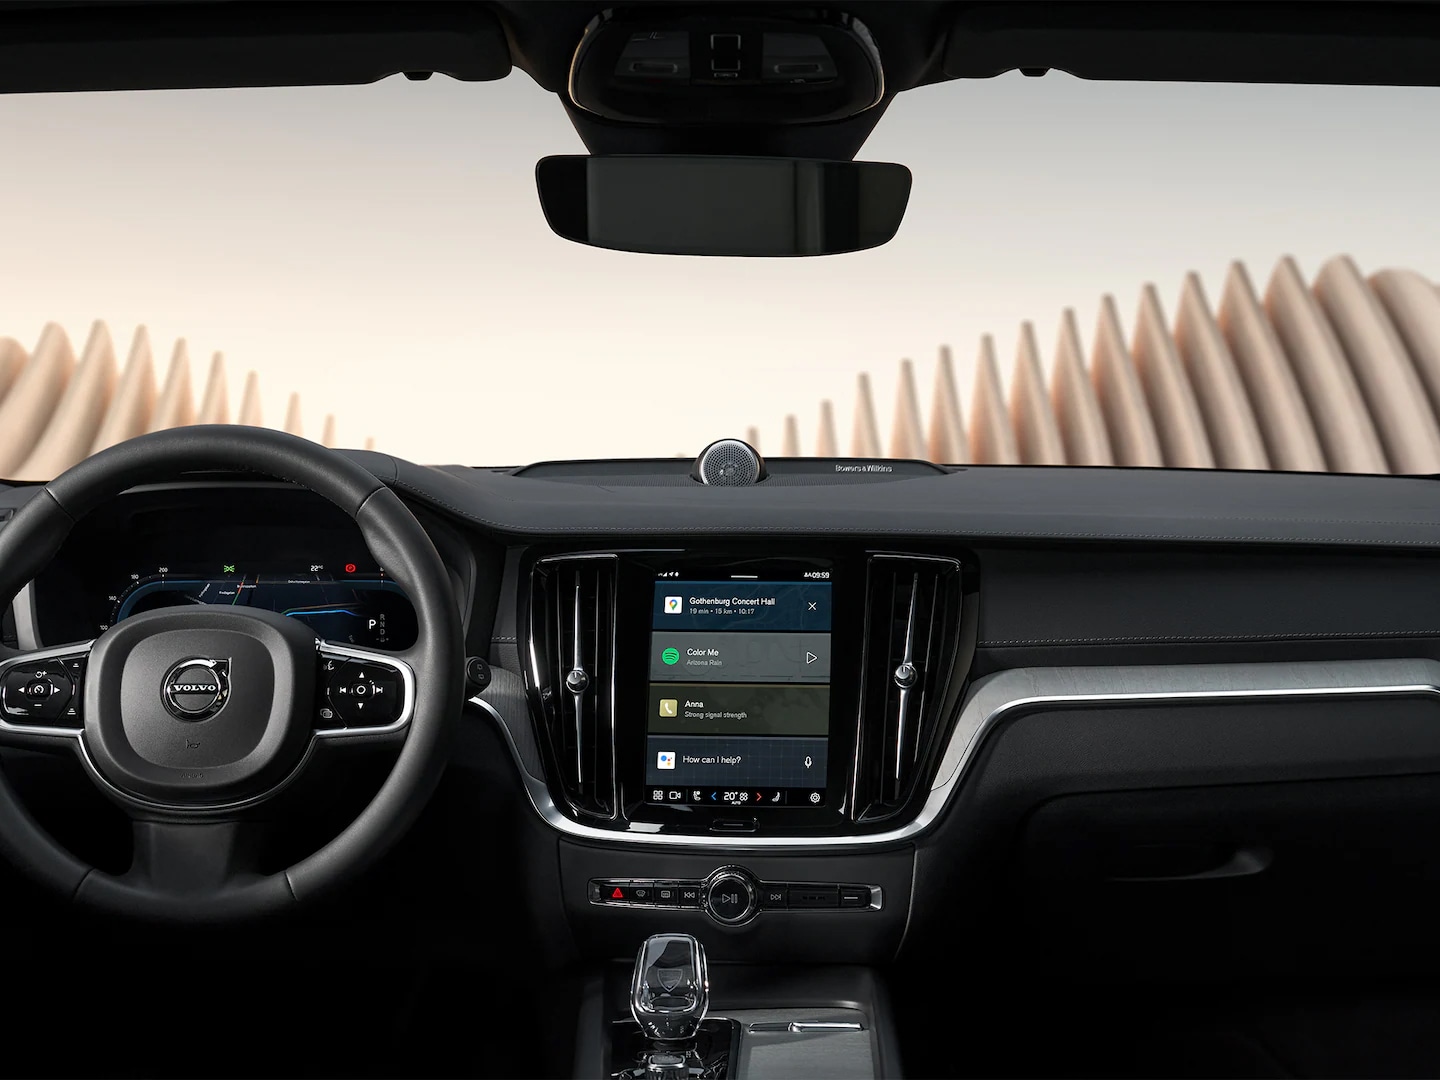 The Volvo V60 Cross Country’s steering wheel, instrument panel and infotainment touchscreen.